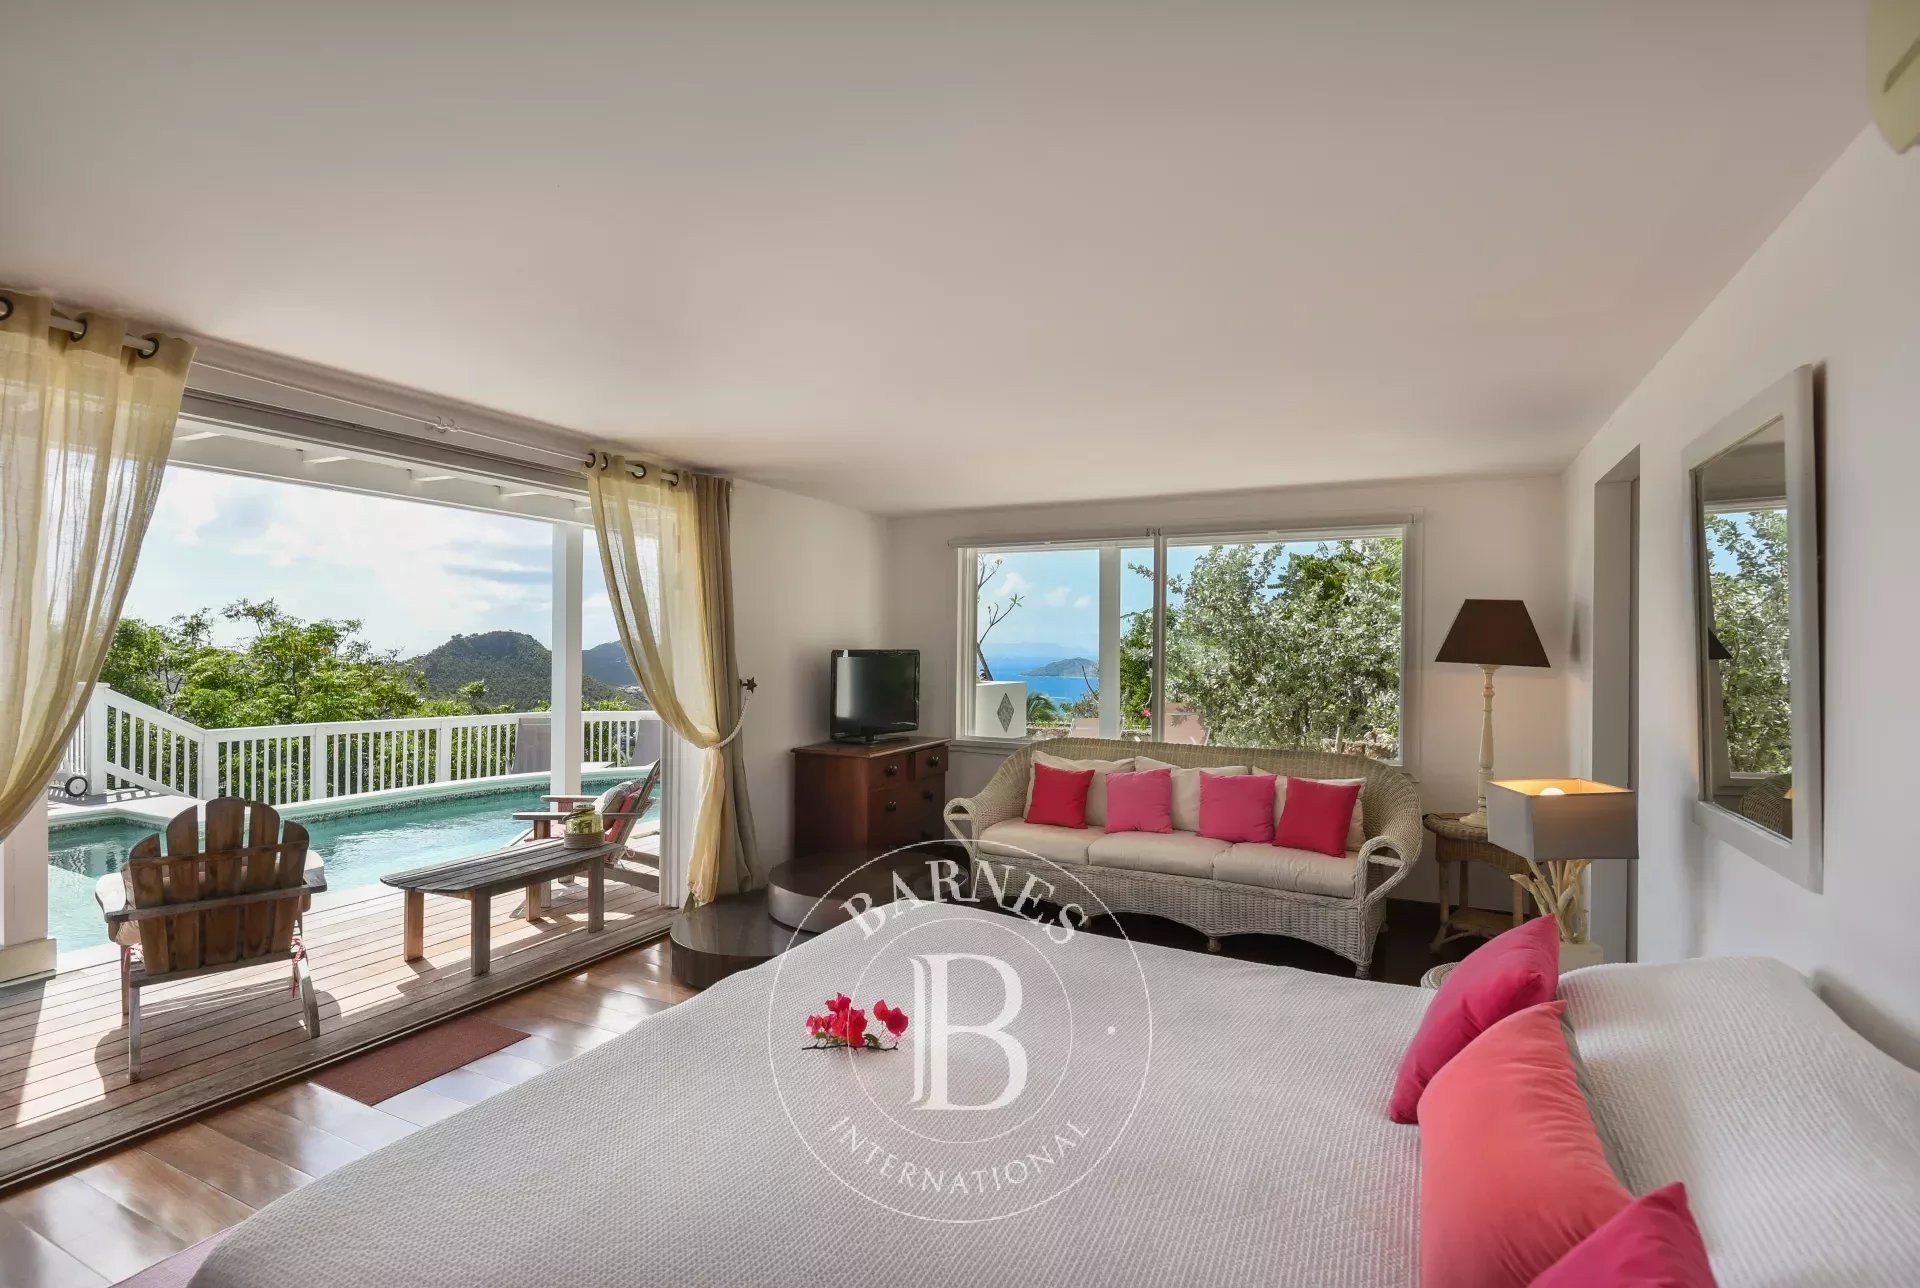 3 -Bedroom Villa in St.Barths - picture 11 title=